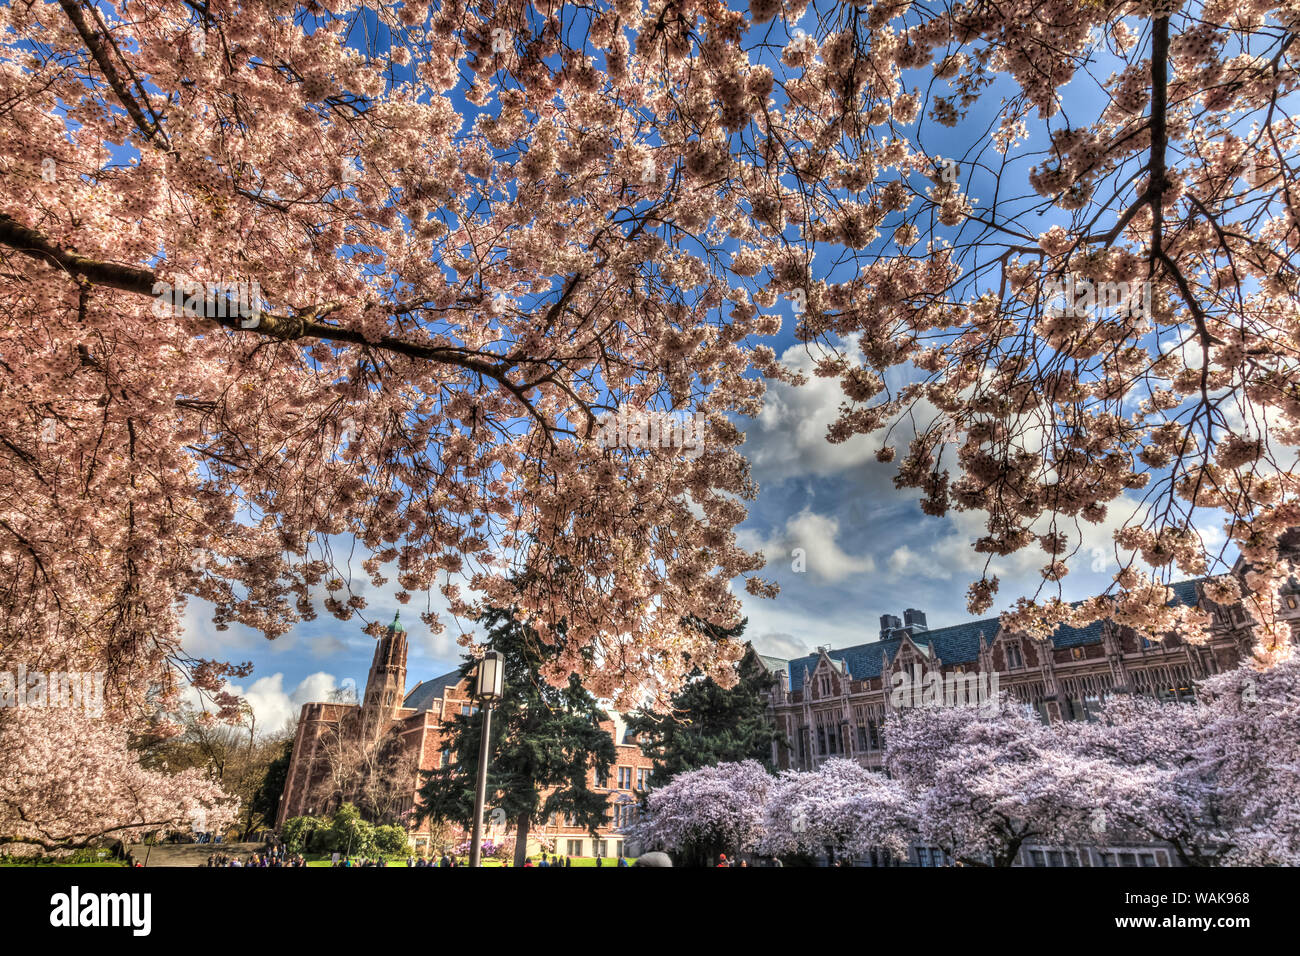 Cherry blossoms in peak bloom, spring, University of Washington campus, Seattle, Washington State, USA. (Editorial Use Only) Stock Photo